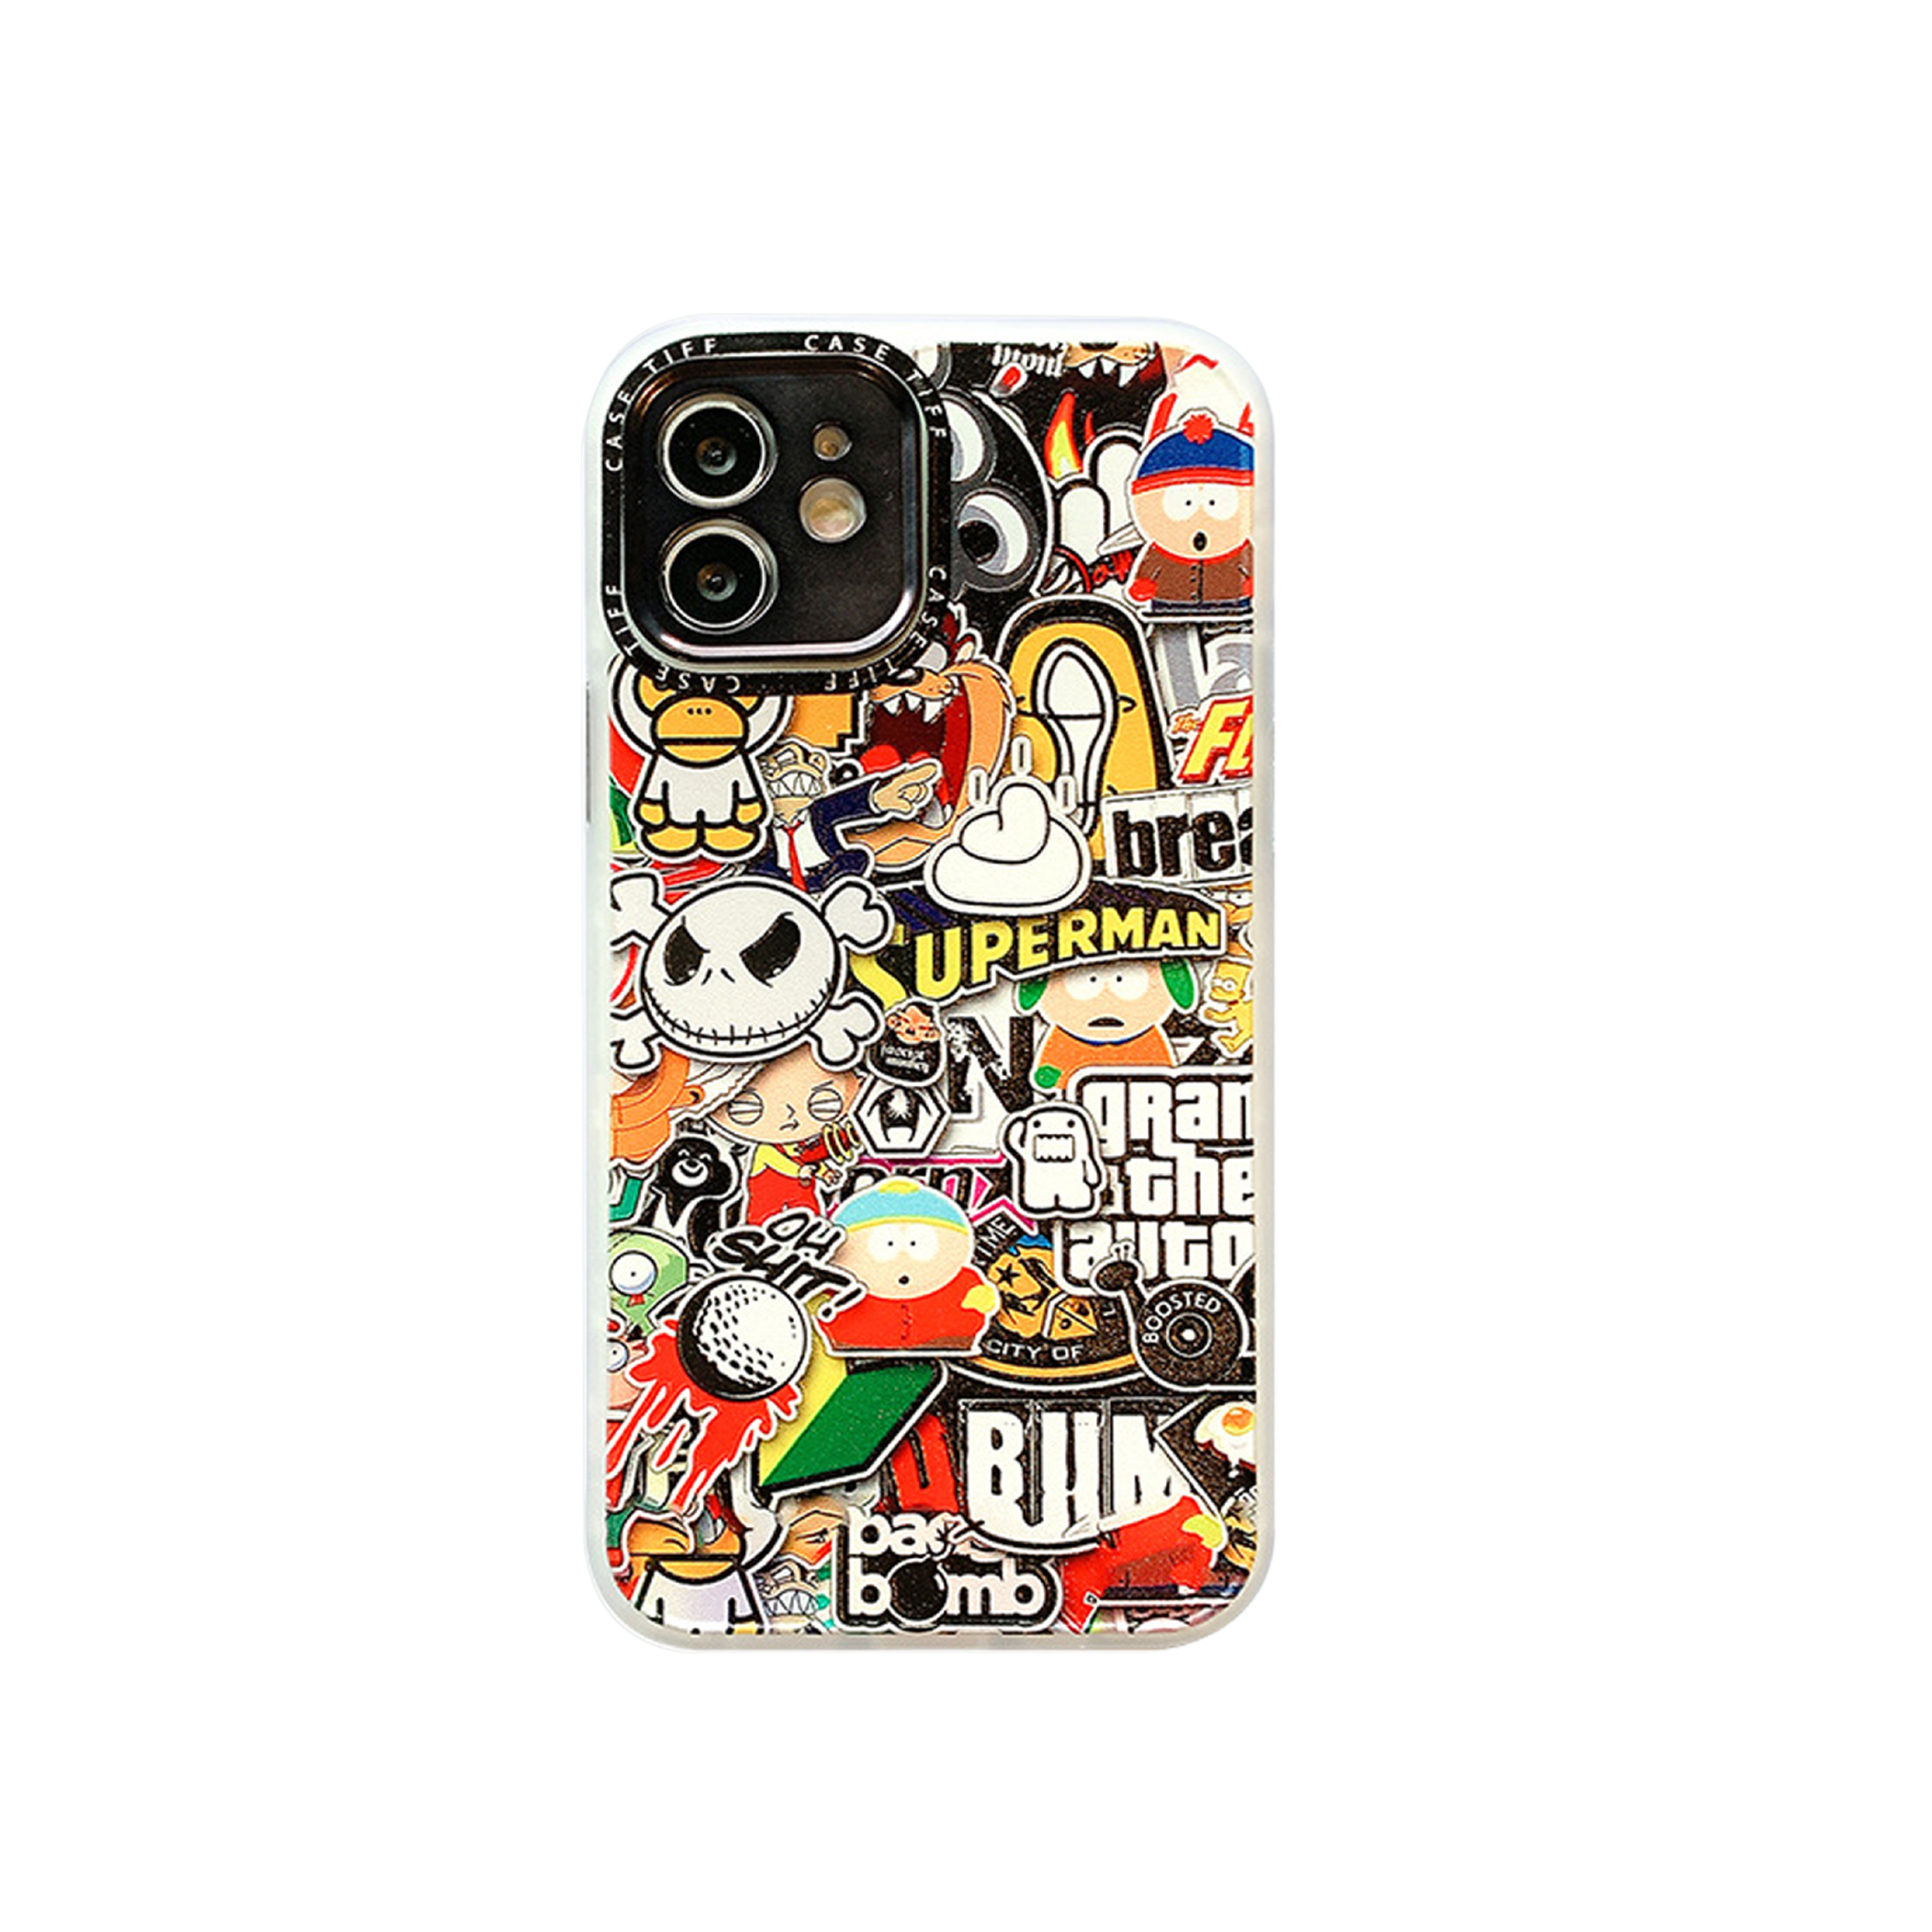 Cute Anime Cats Phone Case for Google Pixel 7 6 Pro 5A 5